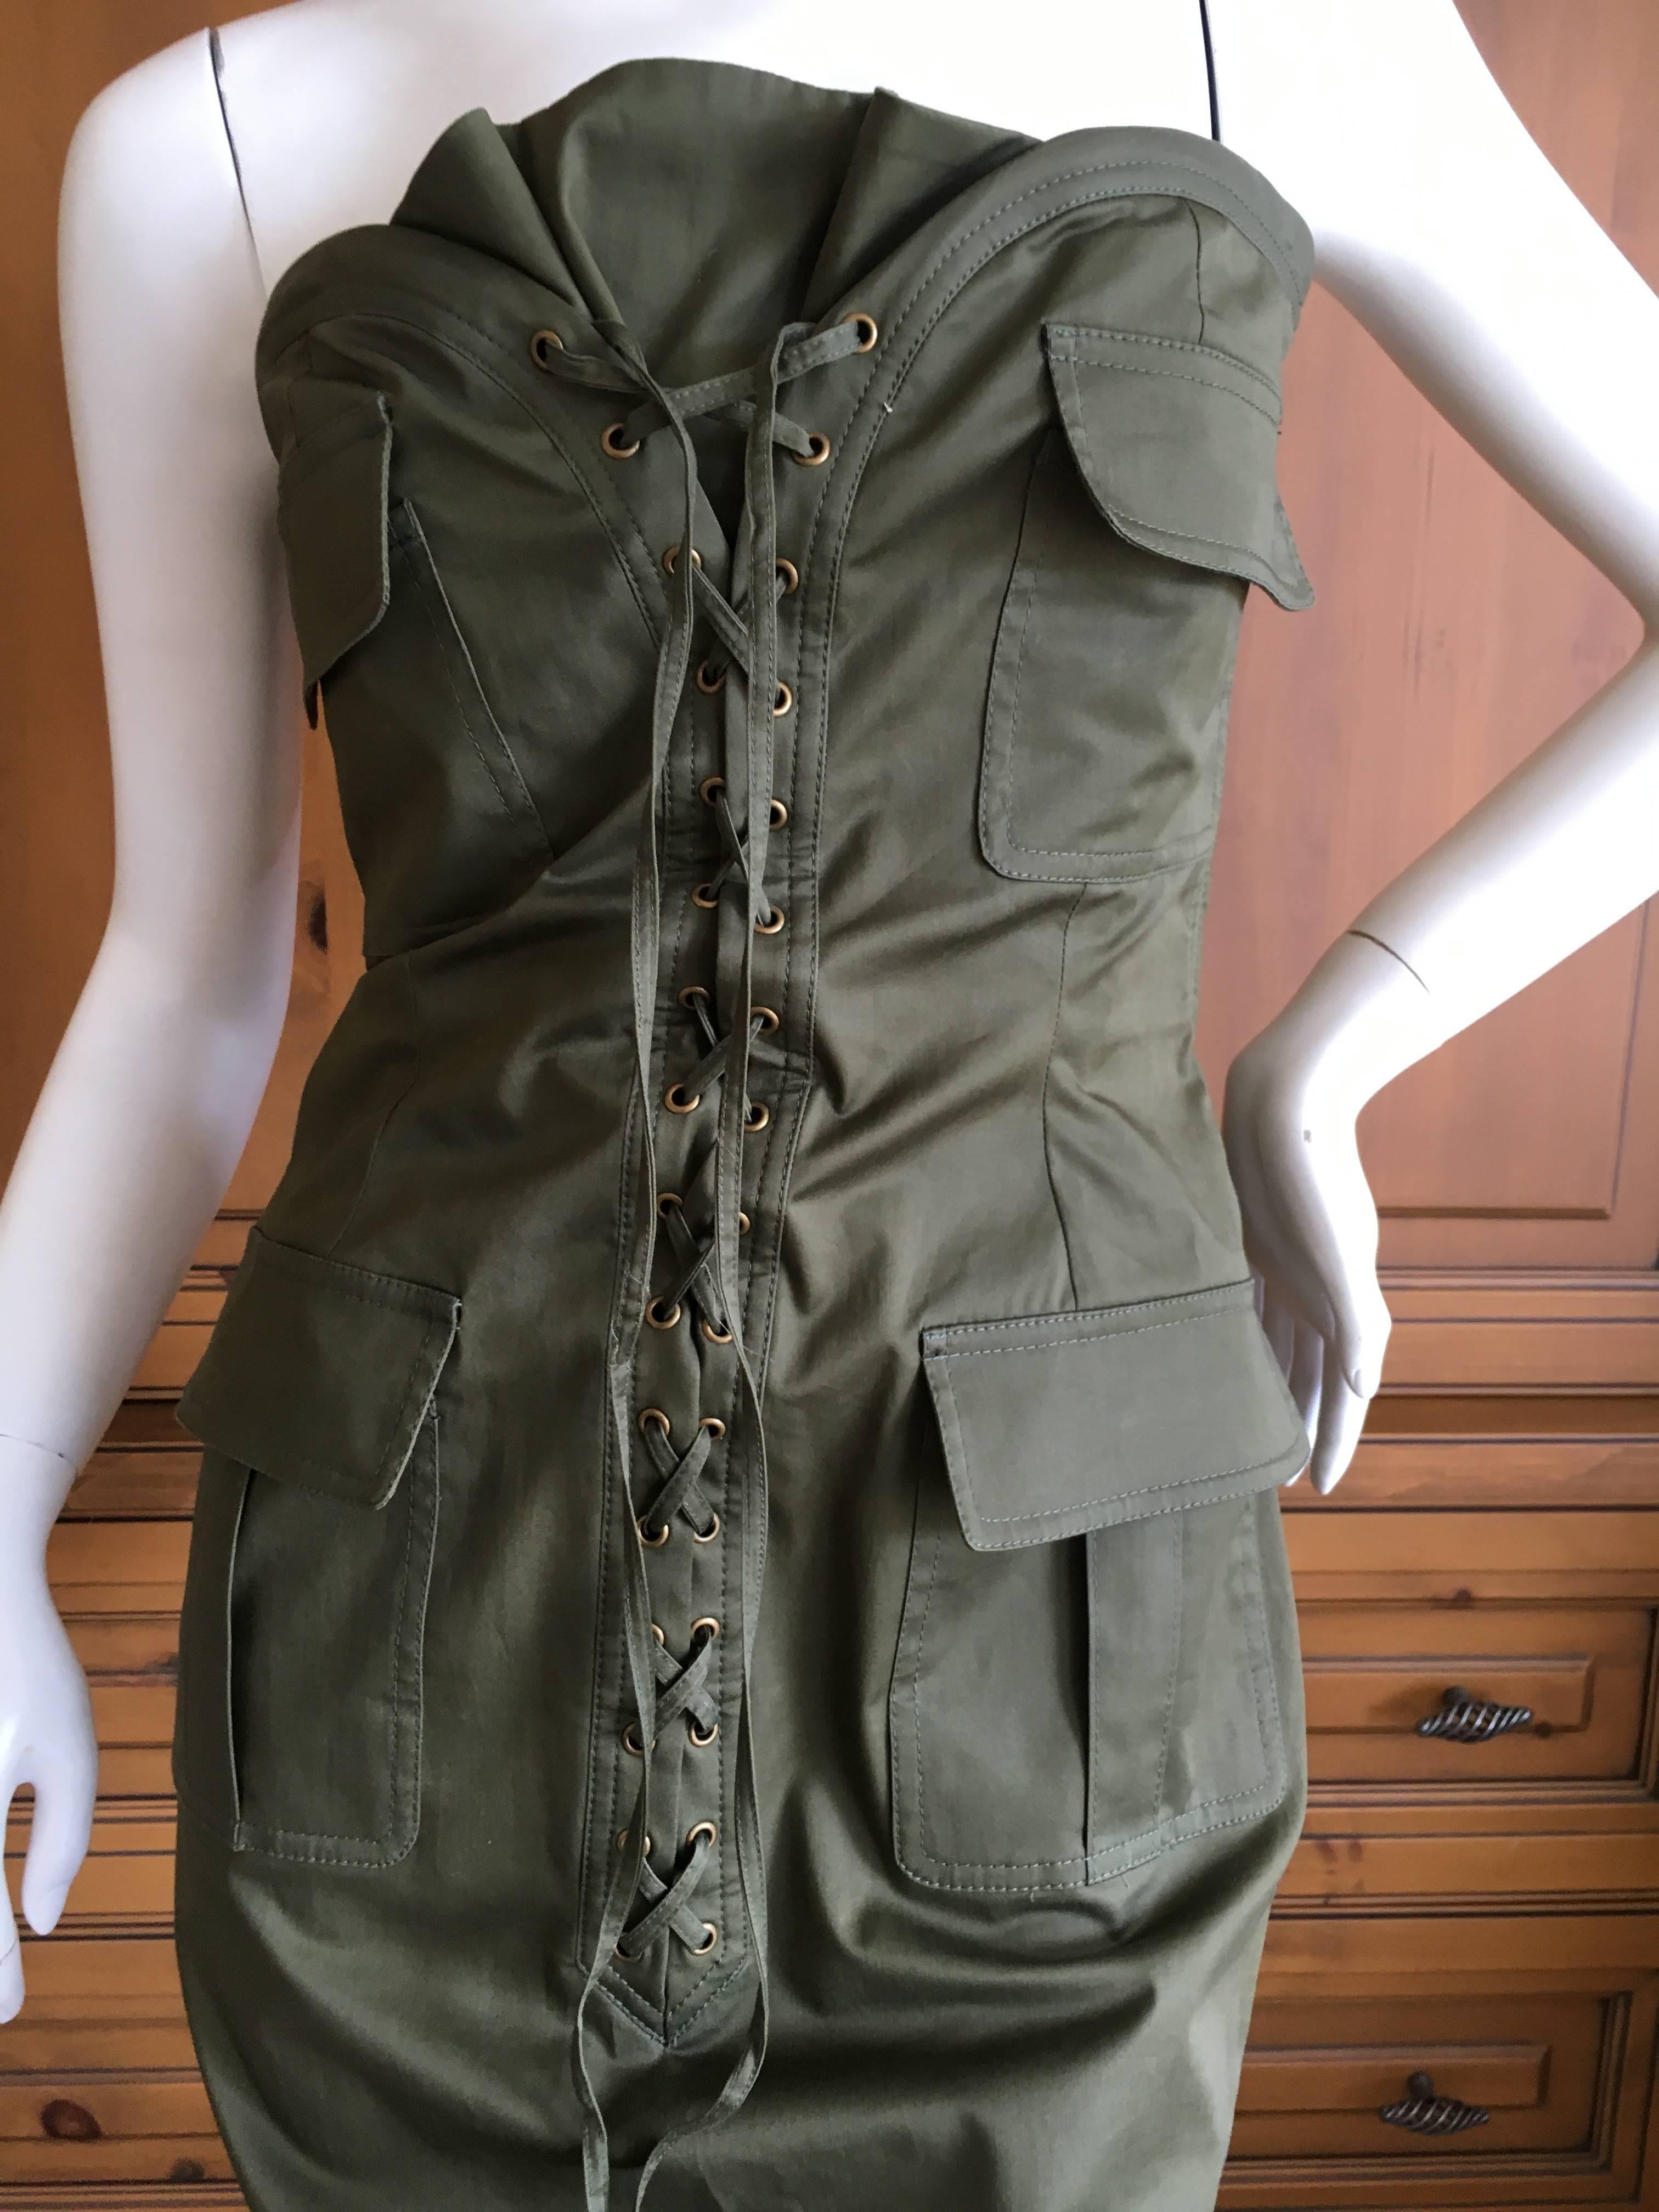 Yves Saint Laurent by Tom Ford Strapless Safari Dress with Corset Lacing.
Size 38
Bust 36"
Waist 28"
Hips 38"
Length 34"
Excellent condition